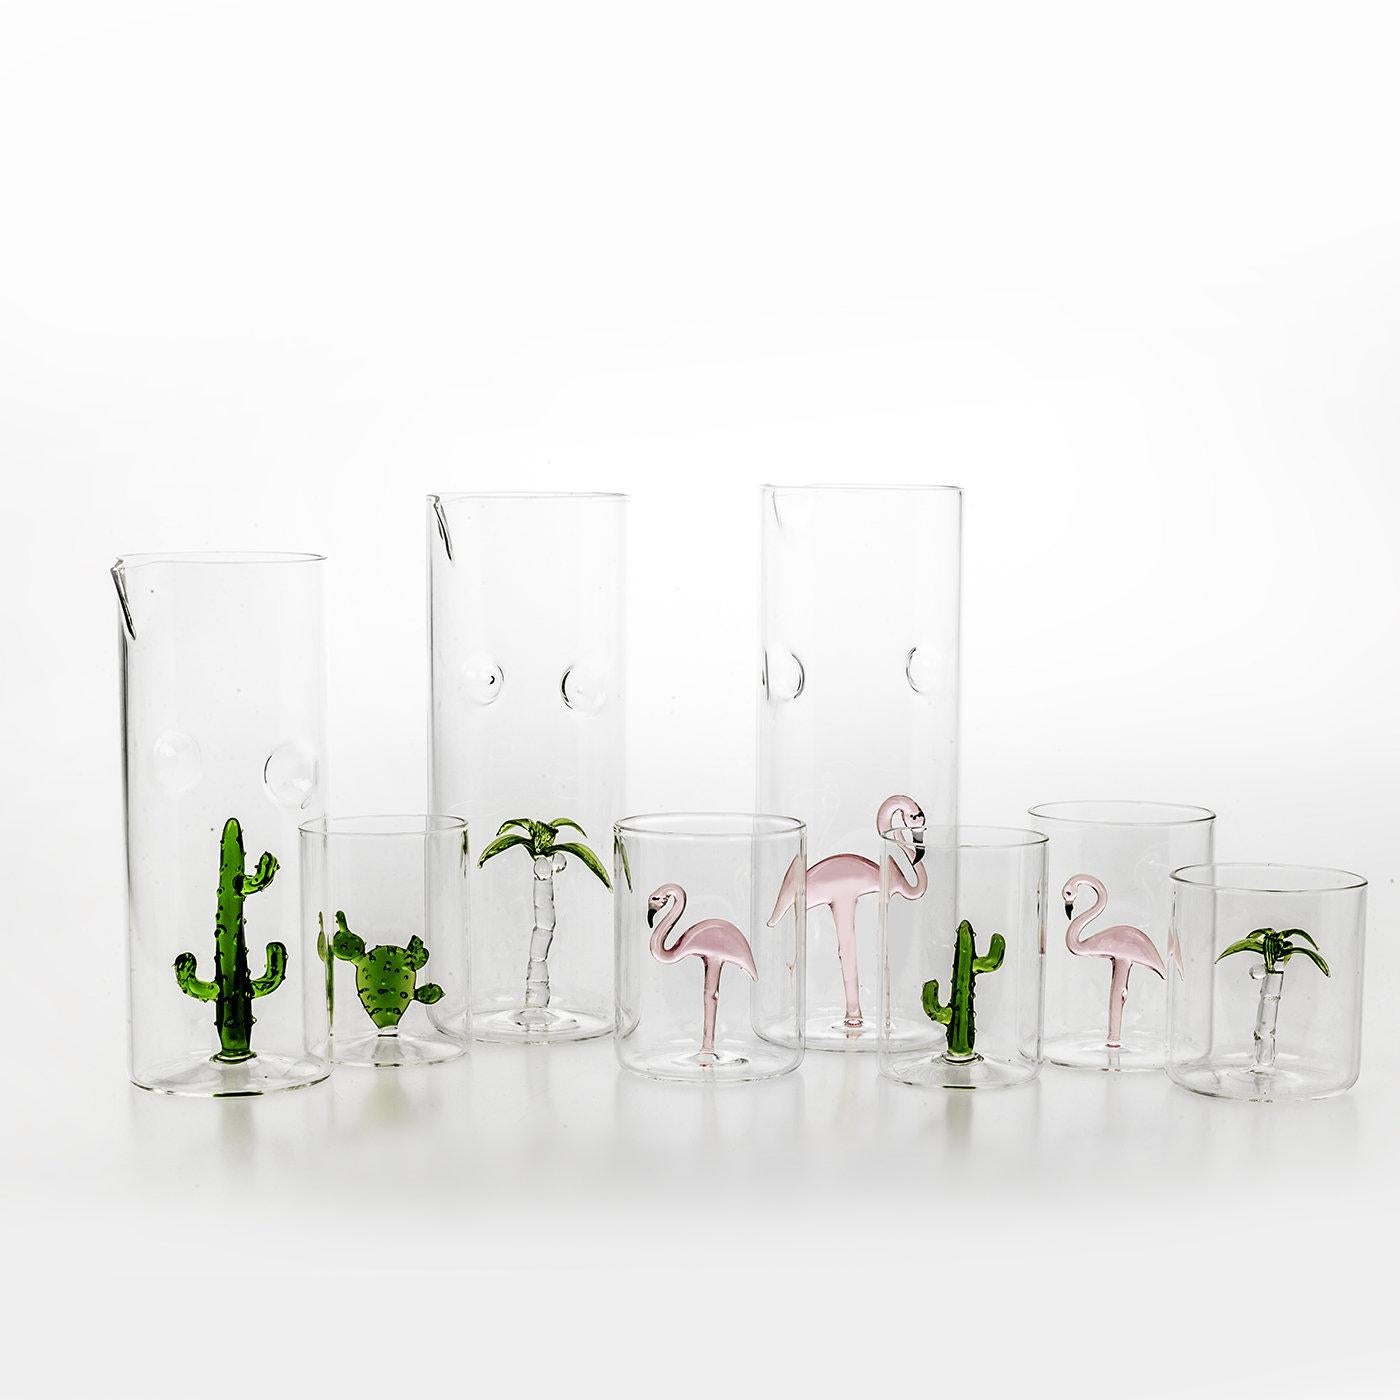 Exquisitely handcrafted and versatile, this charming set comprises one pitcher and four glasses adorned with the image of a flamingo, hand-painted in pink with black and white details. The birds are sculptural elements blown into the pieces and